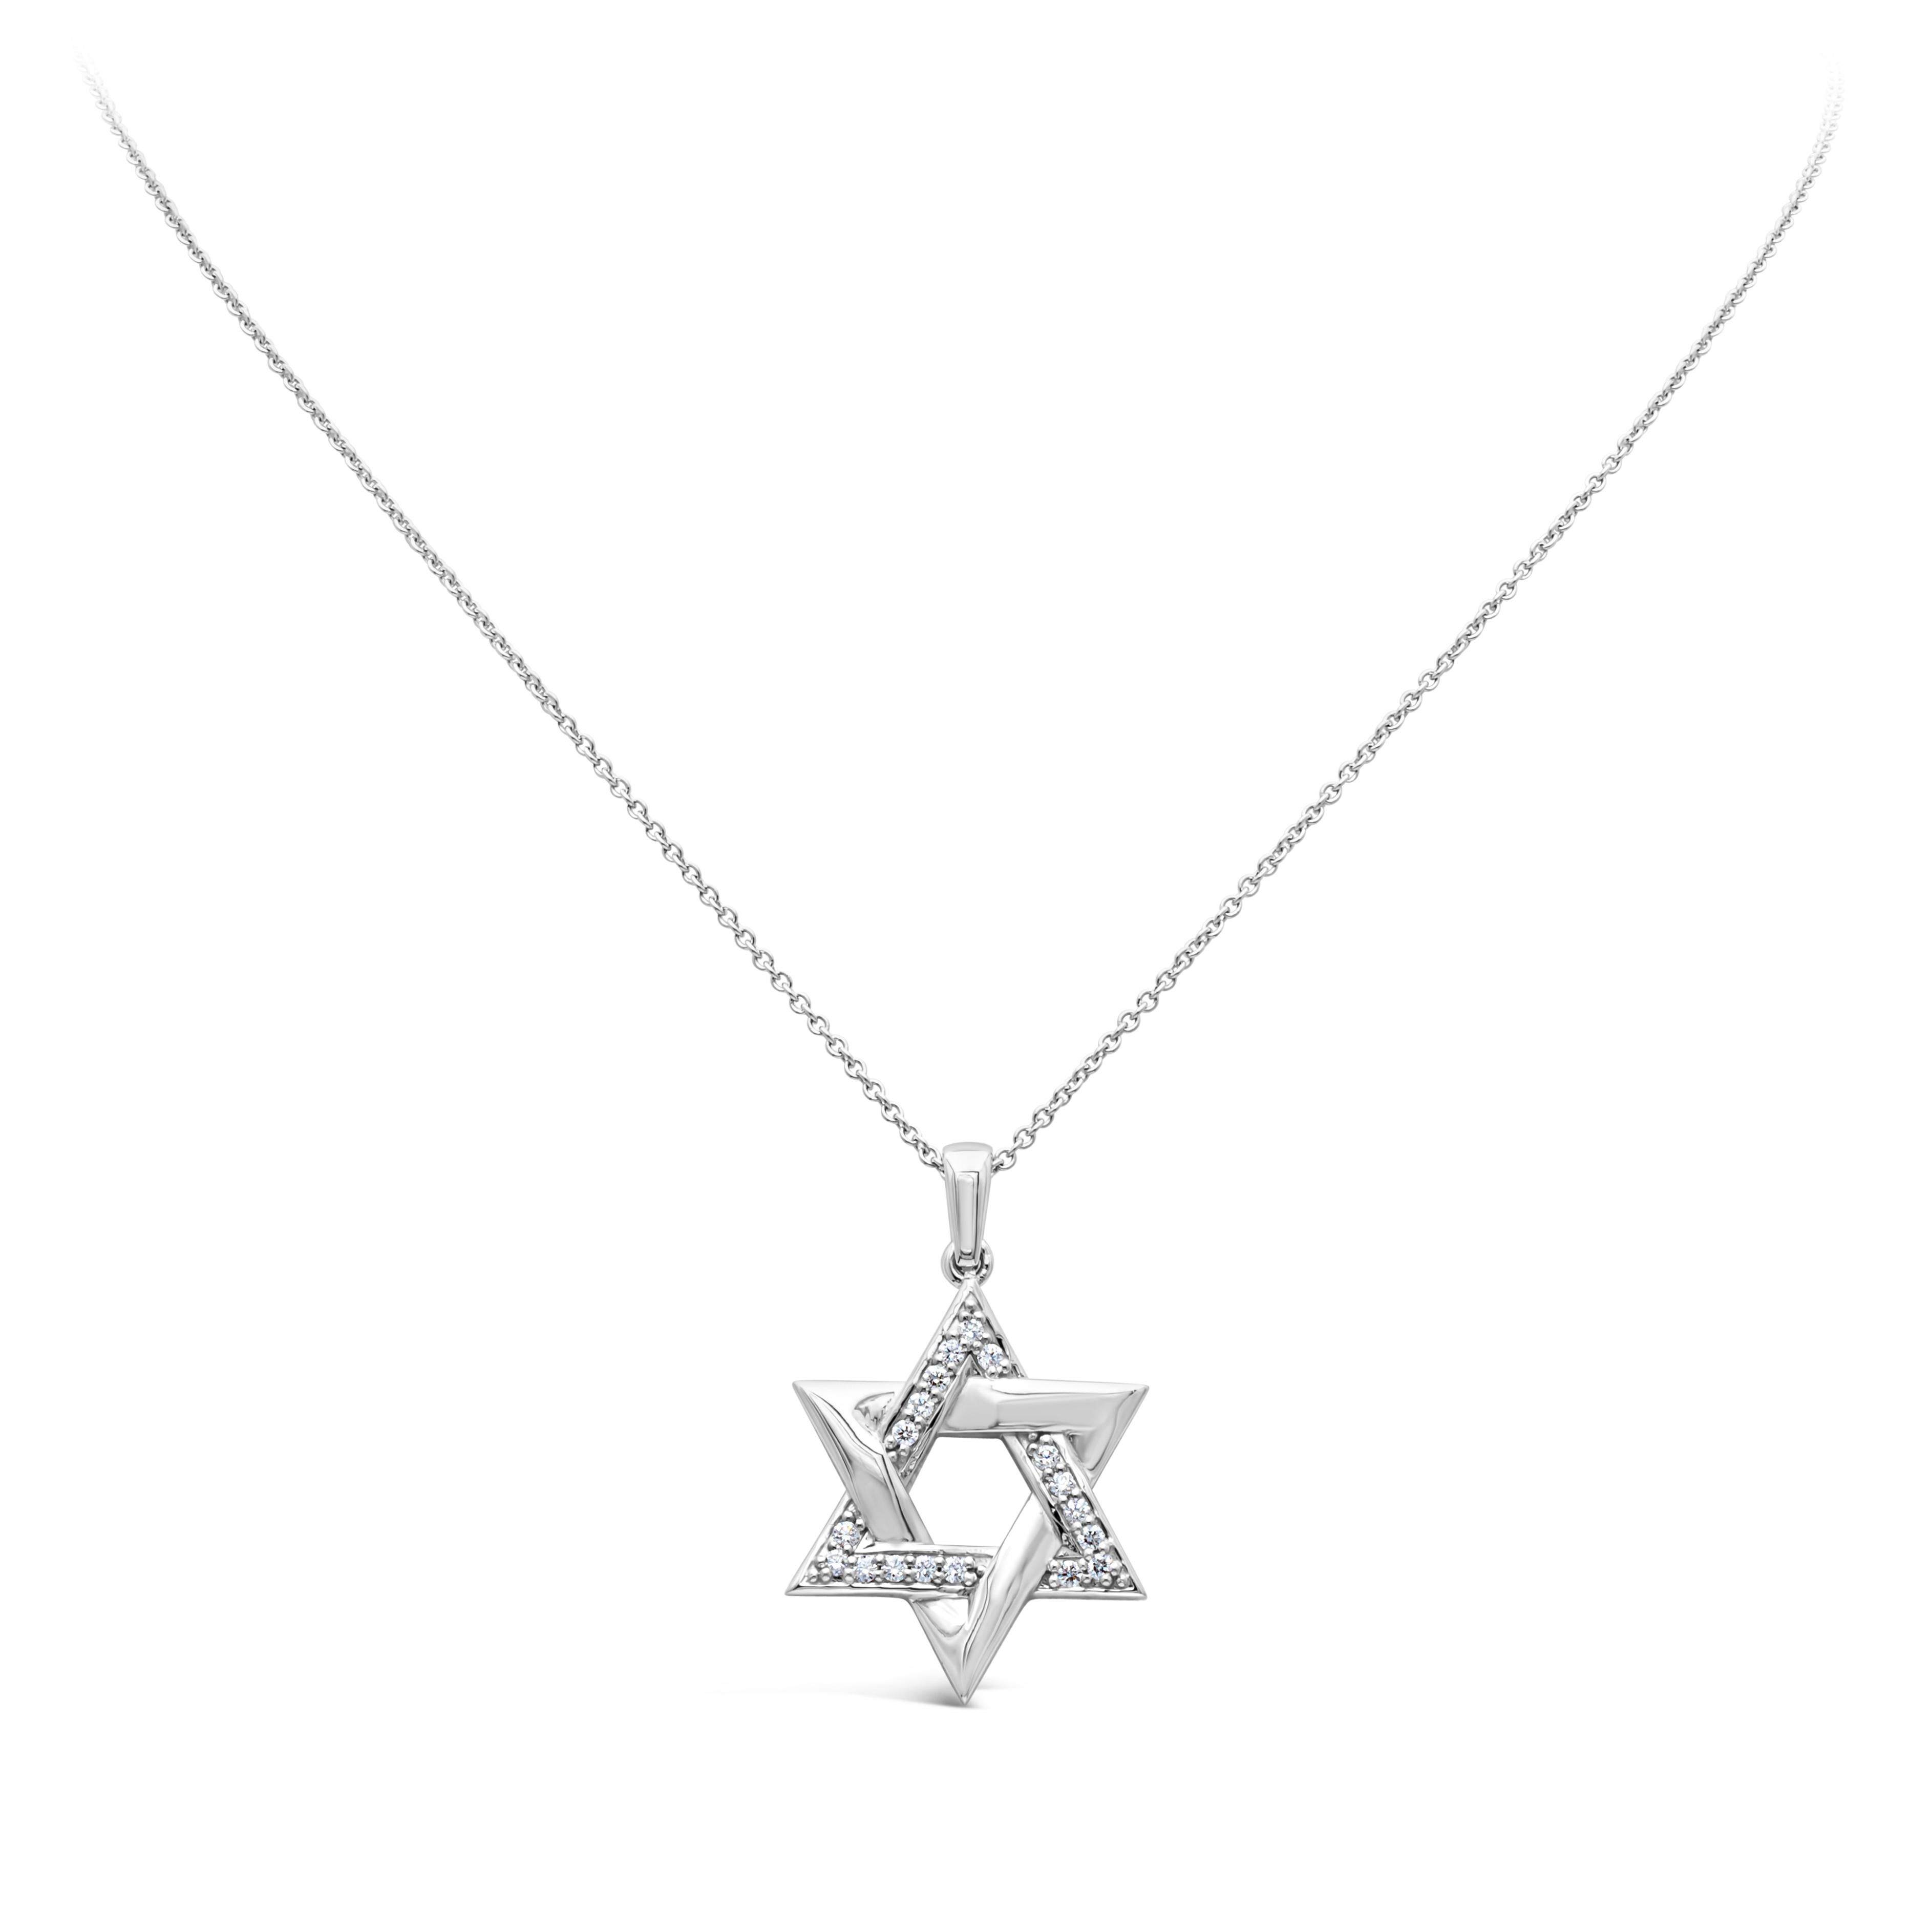 A simple Star of David pendant made in 18K White Gold accented with round diamonds weighing 0.30 carats total, F color and VS in clarity. Suspended on an 18 inch chain. Perfect for your everyday use. 

Roman Malakov is a custom house, specializing